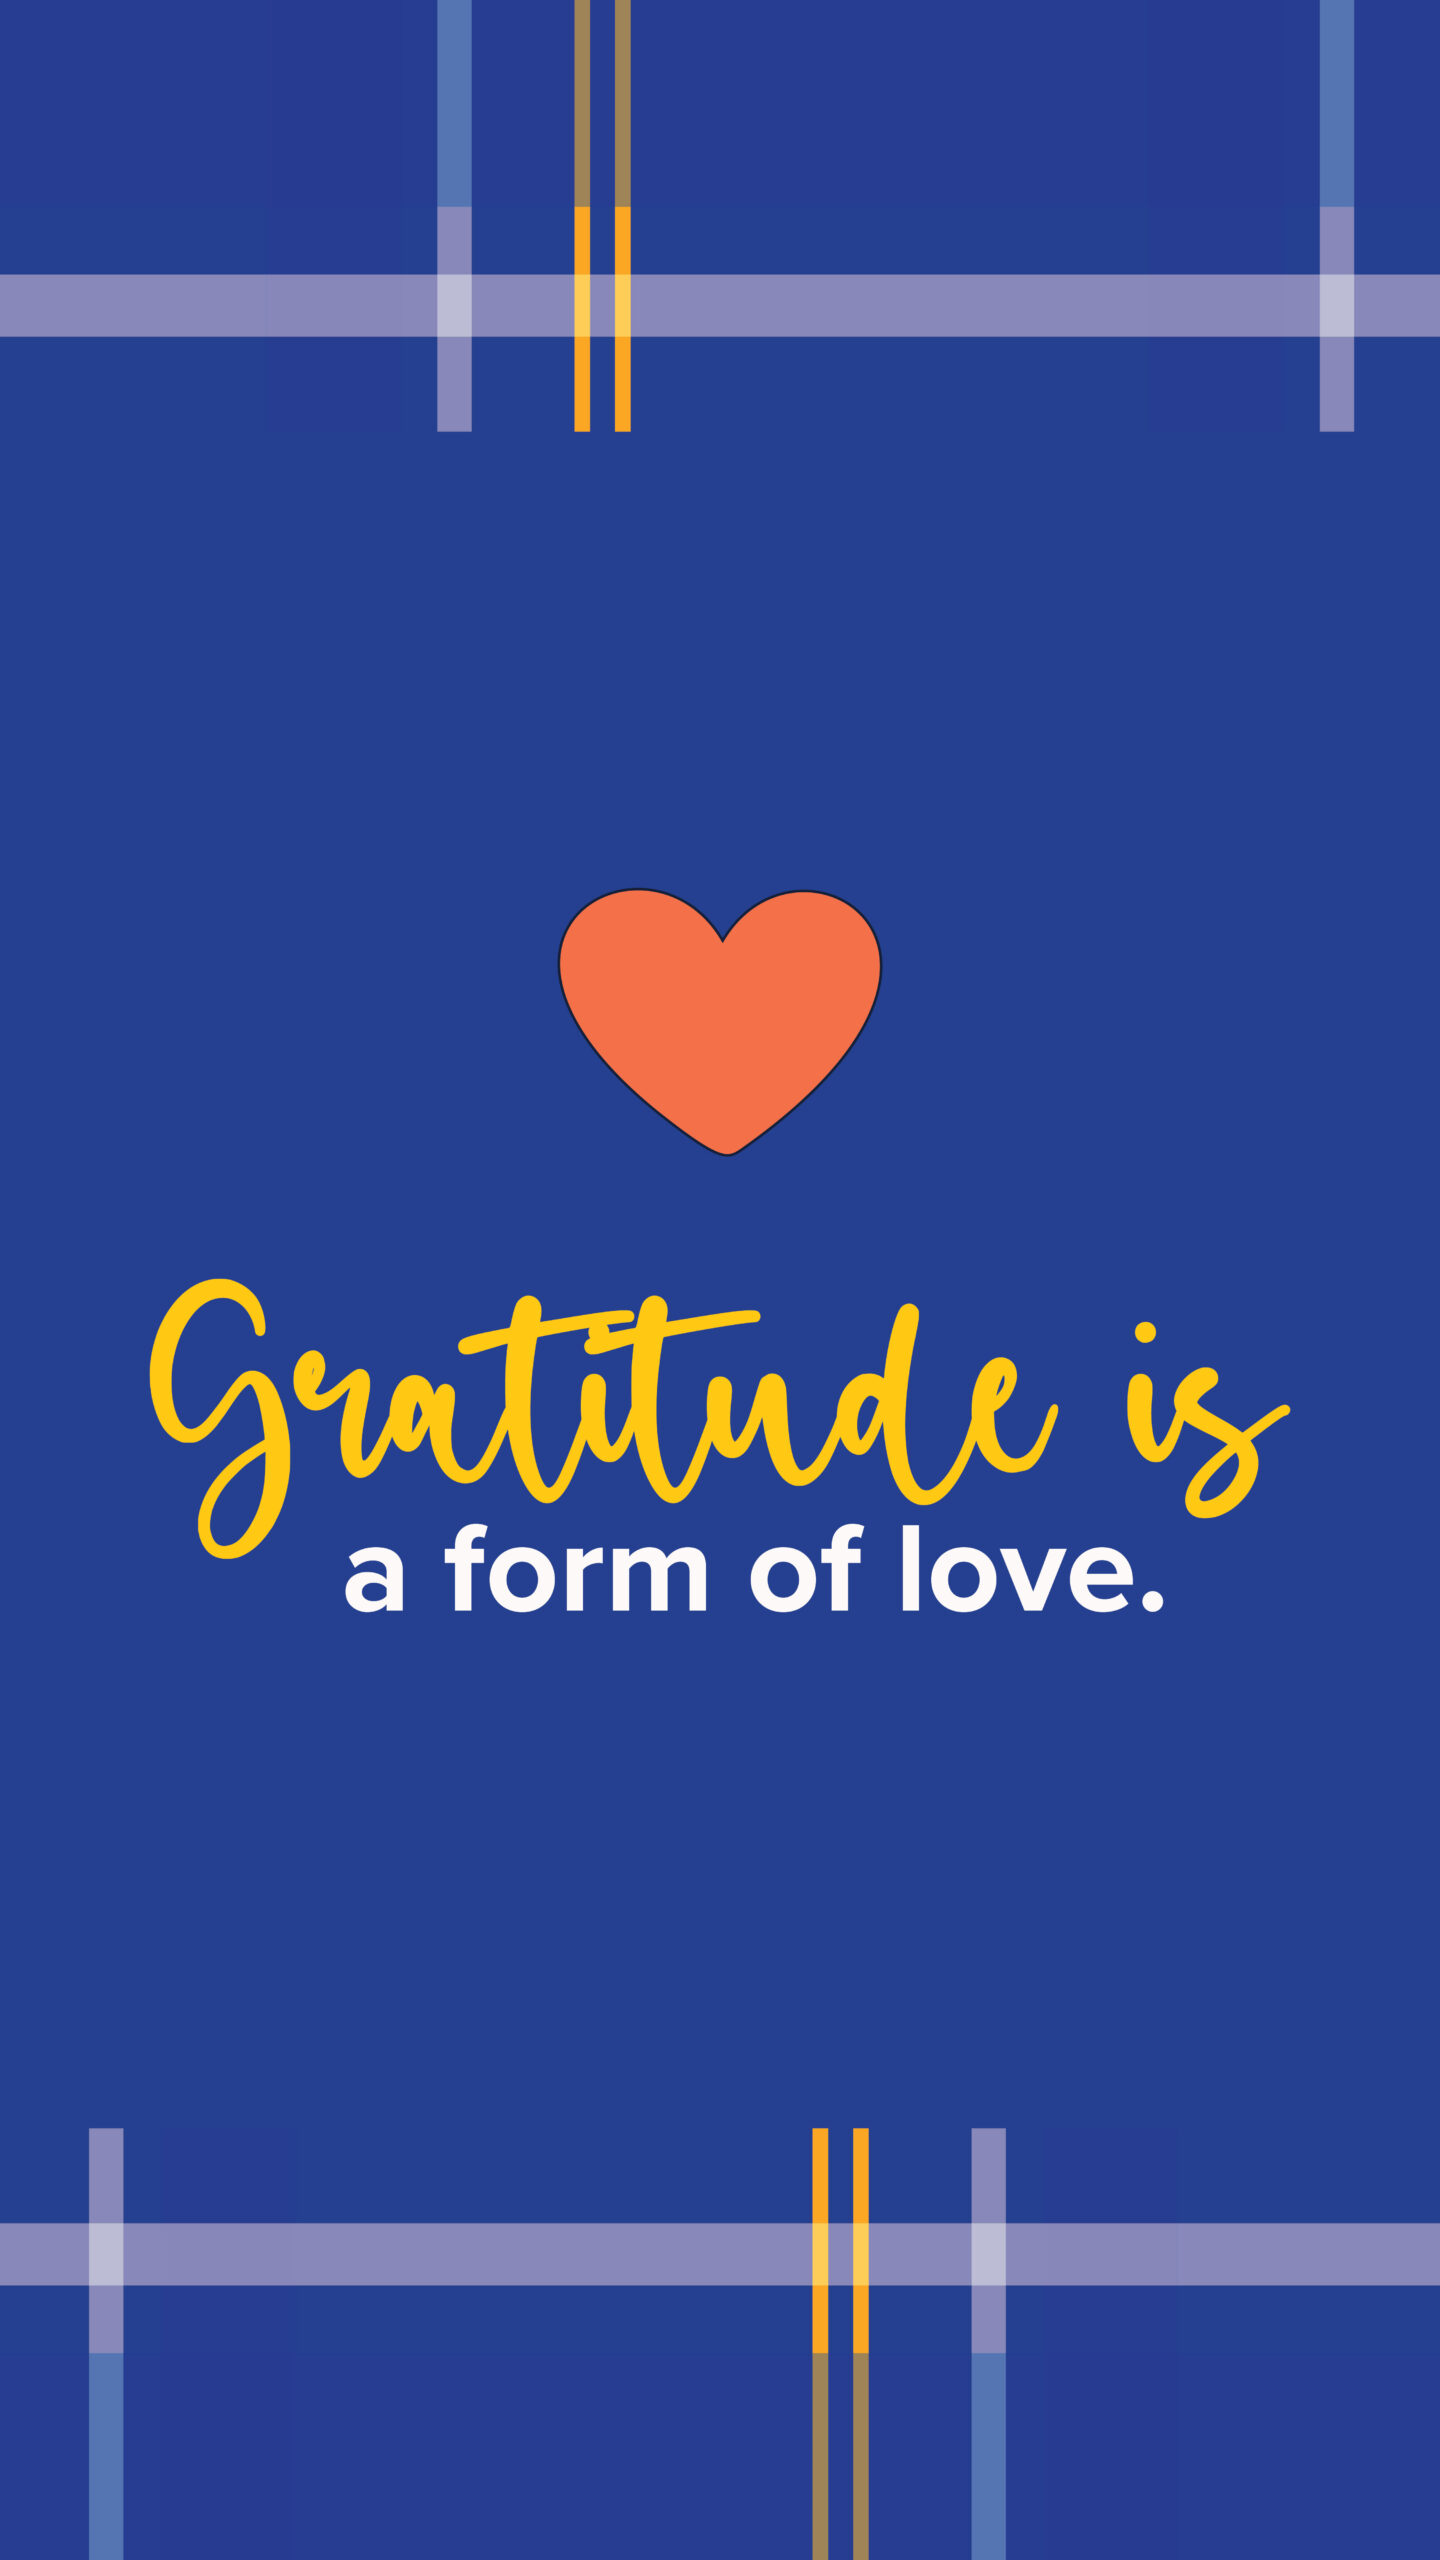 gratitude is a form of love. graphics